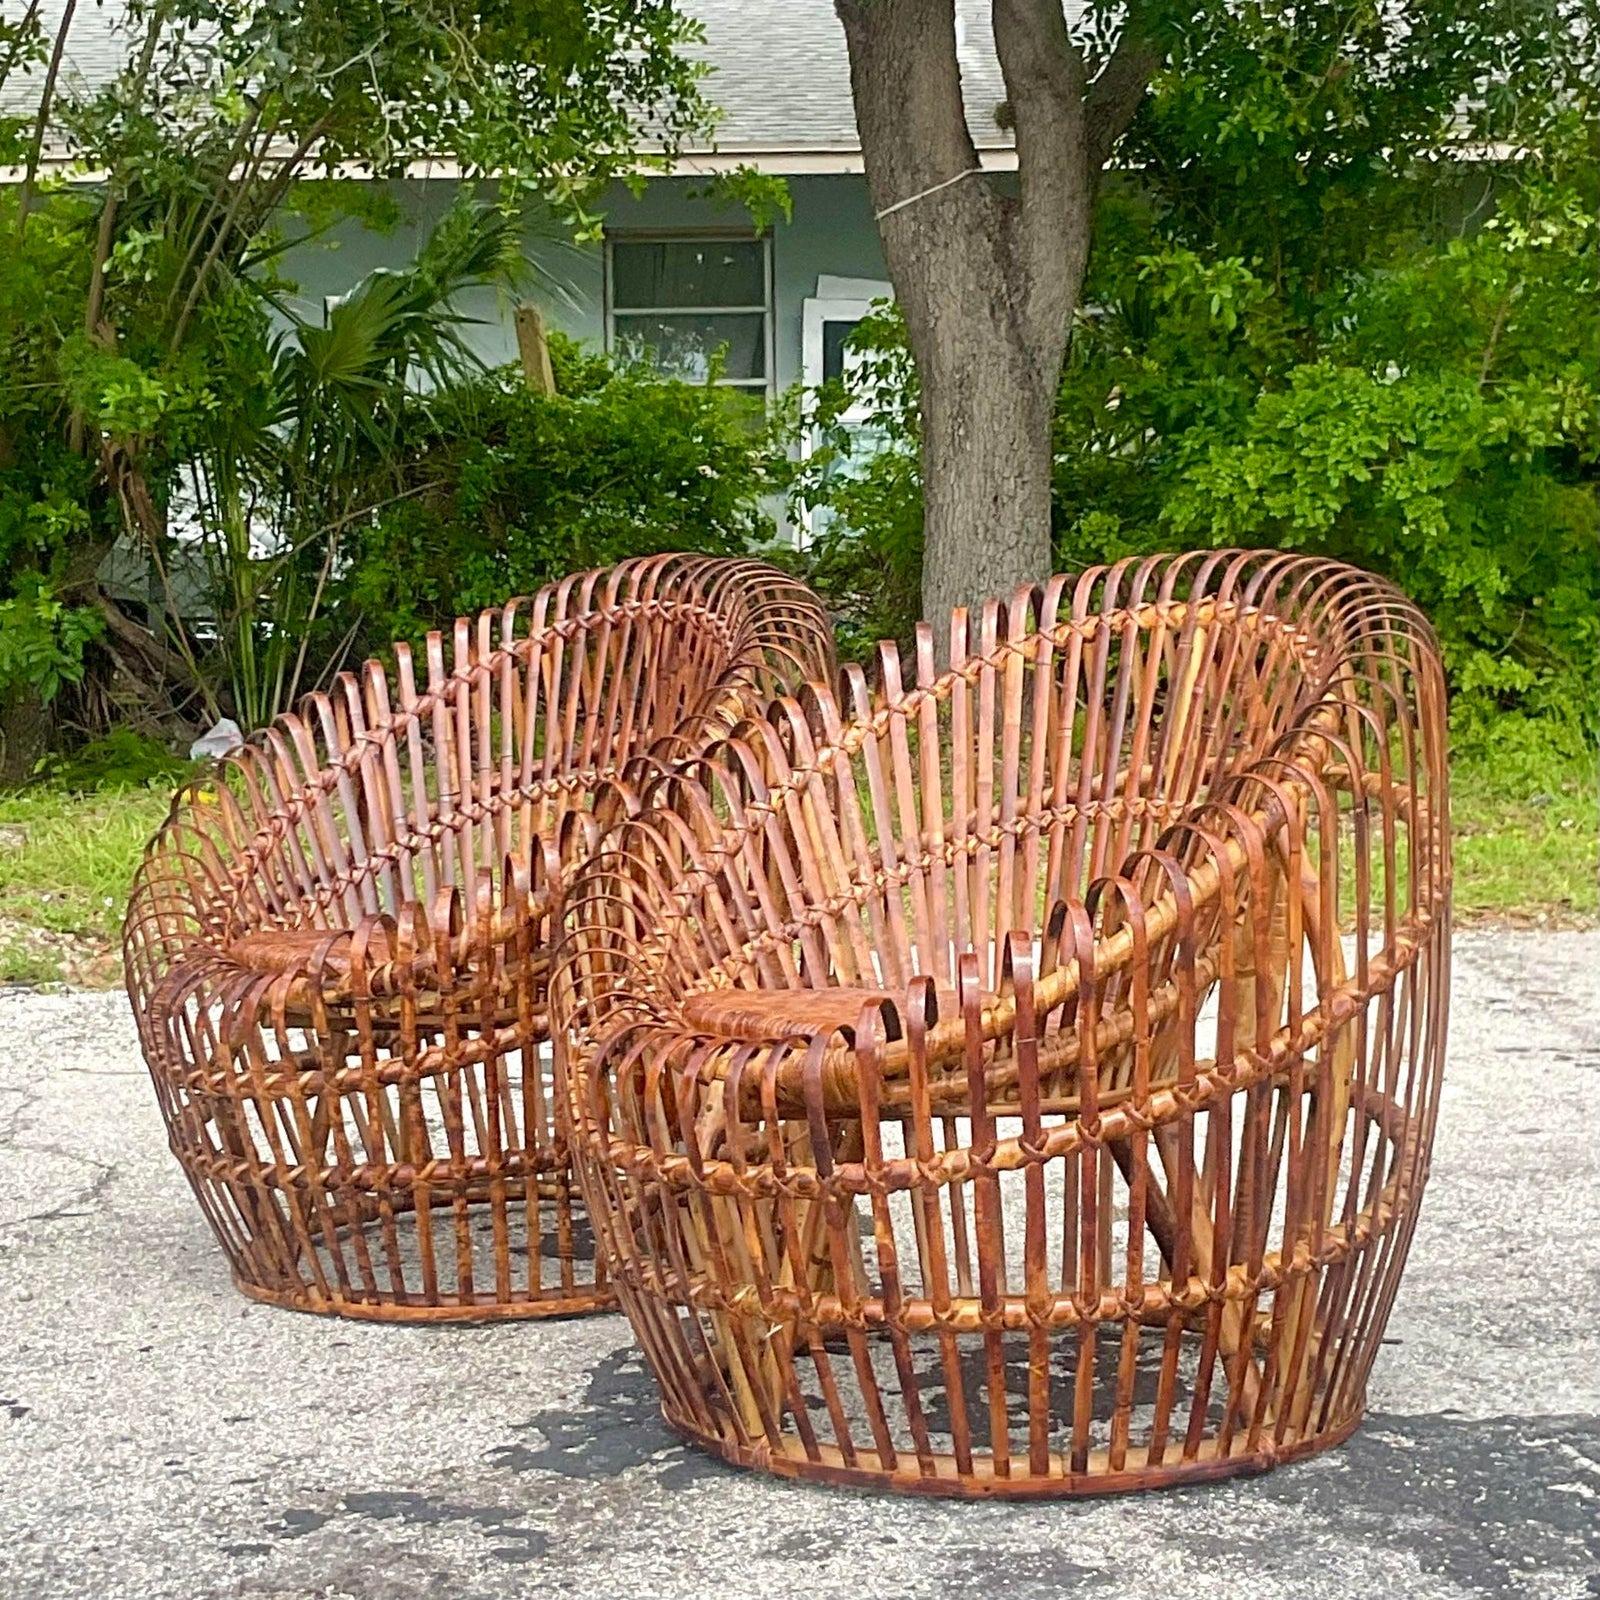 A fabulous pair of vintage Coastal bamboo chairs. Chic strips of bamboo bent into the coveted pod shape. Rich brown tortoise shell finish. Woven rattan seats. Acquired from a Palm Beach estate.